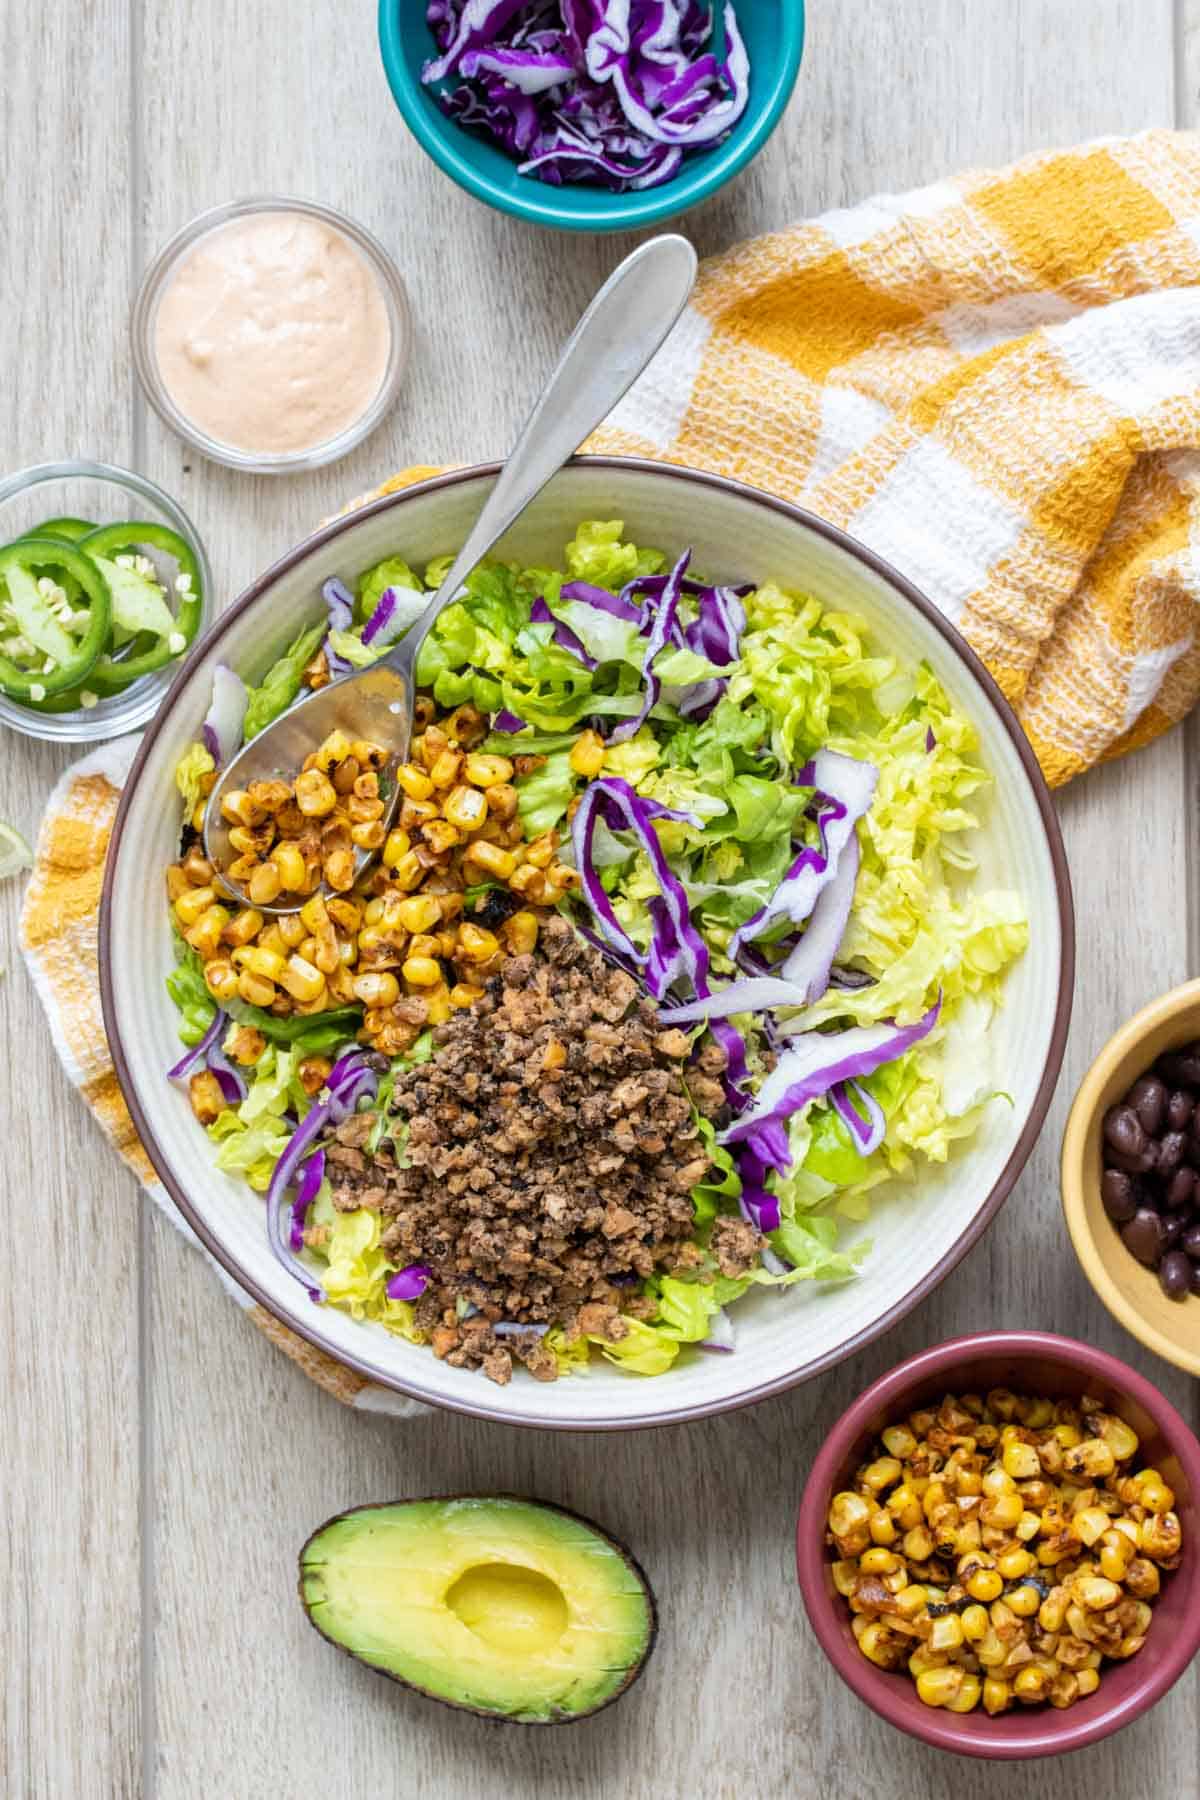 White bowl with lettuce, red cabbage, taco meat and corn on a wooden surface next to toppings